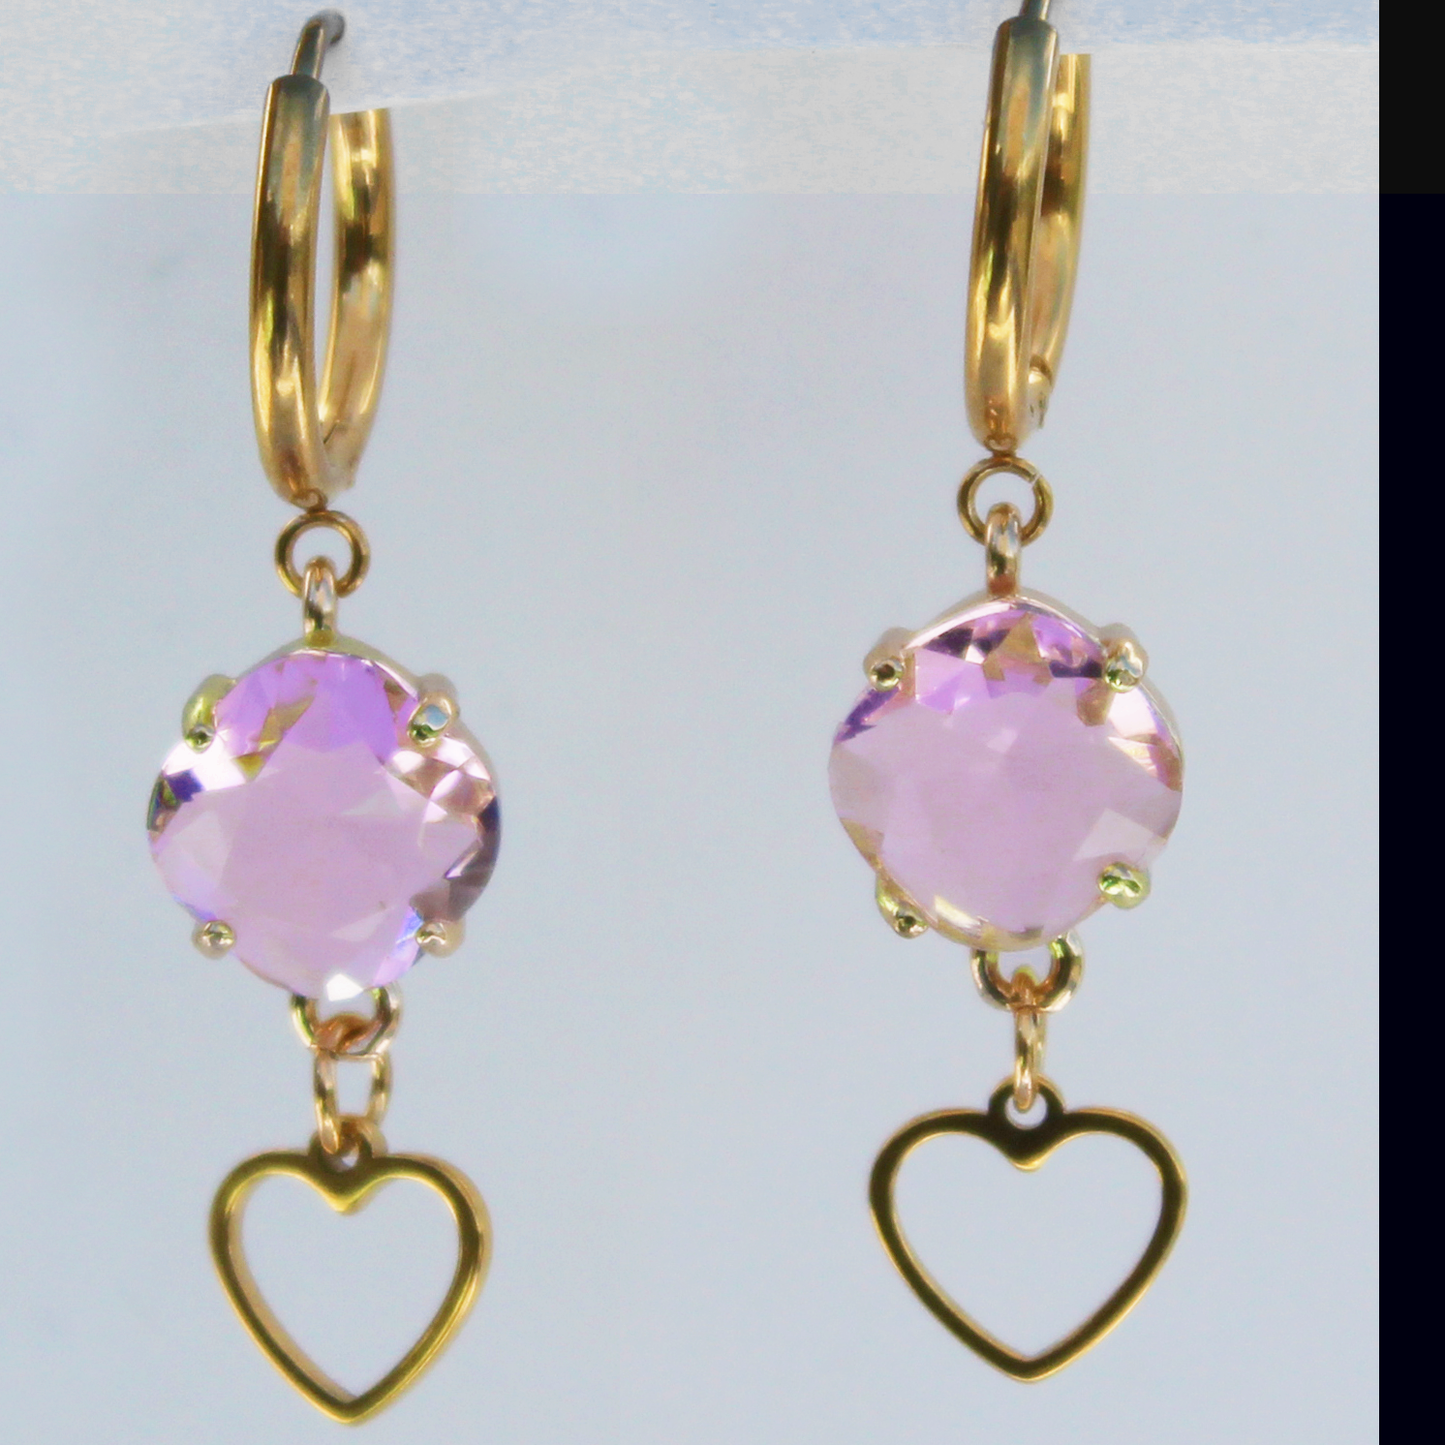 Pale pink crystal with heart charm